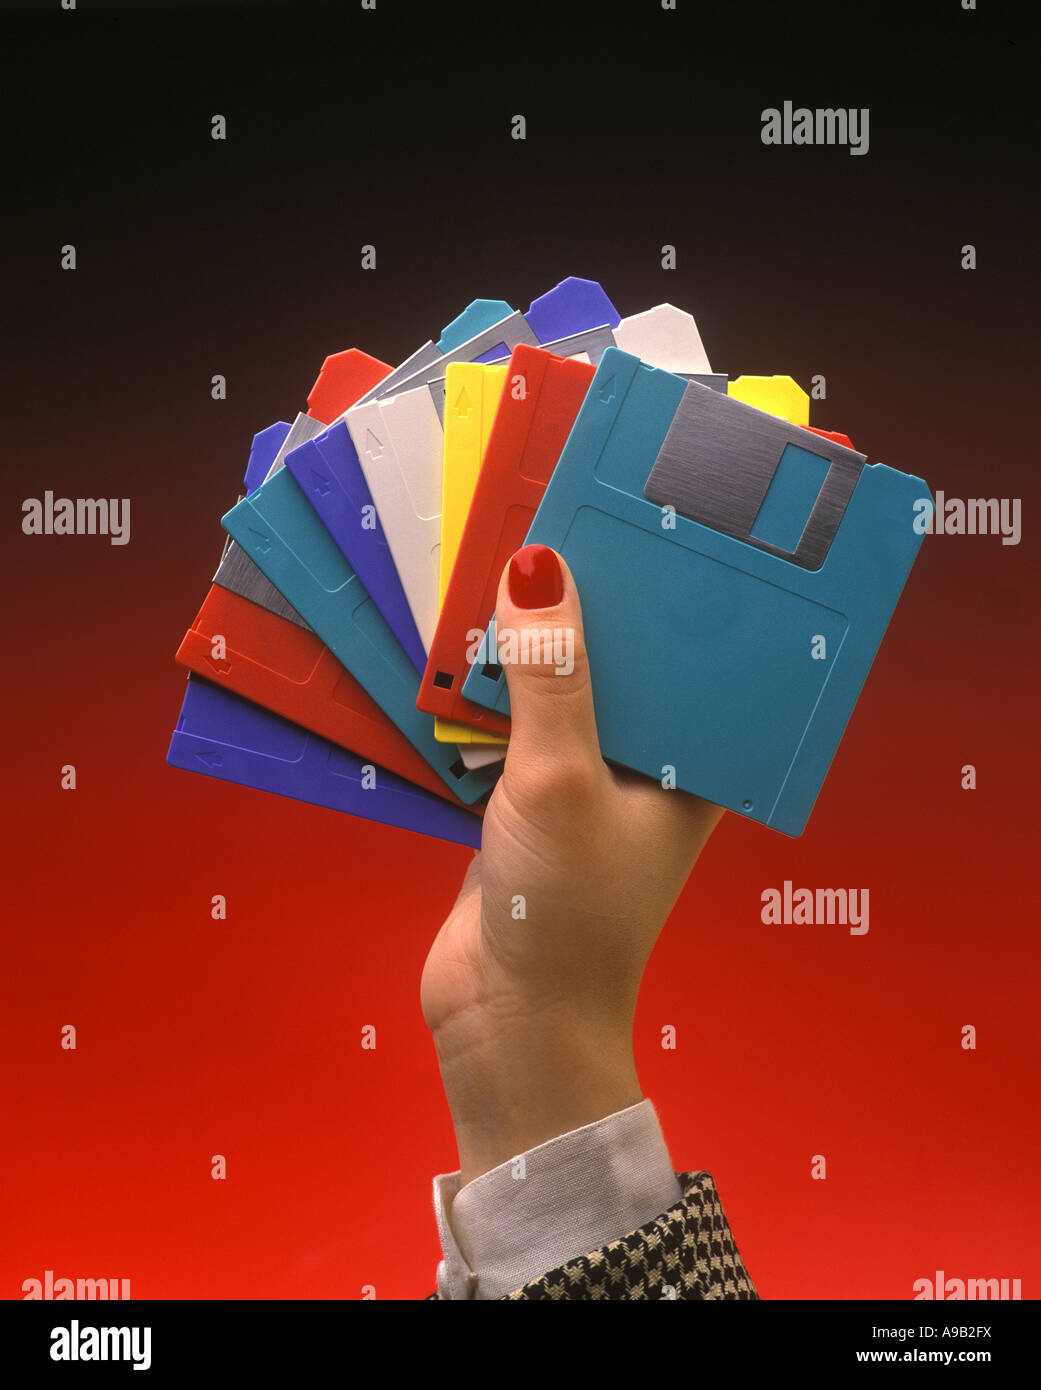 1991 HISTORICAL WOMAN’S HAND HOLDING MULTICOLORED 3.5 INCH MULTICOLORED MICRO FLOPPY DISCS (©IBM CORP 1973) ON PLAIN RED BACKGROUND Stock Photo